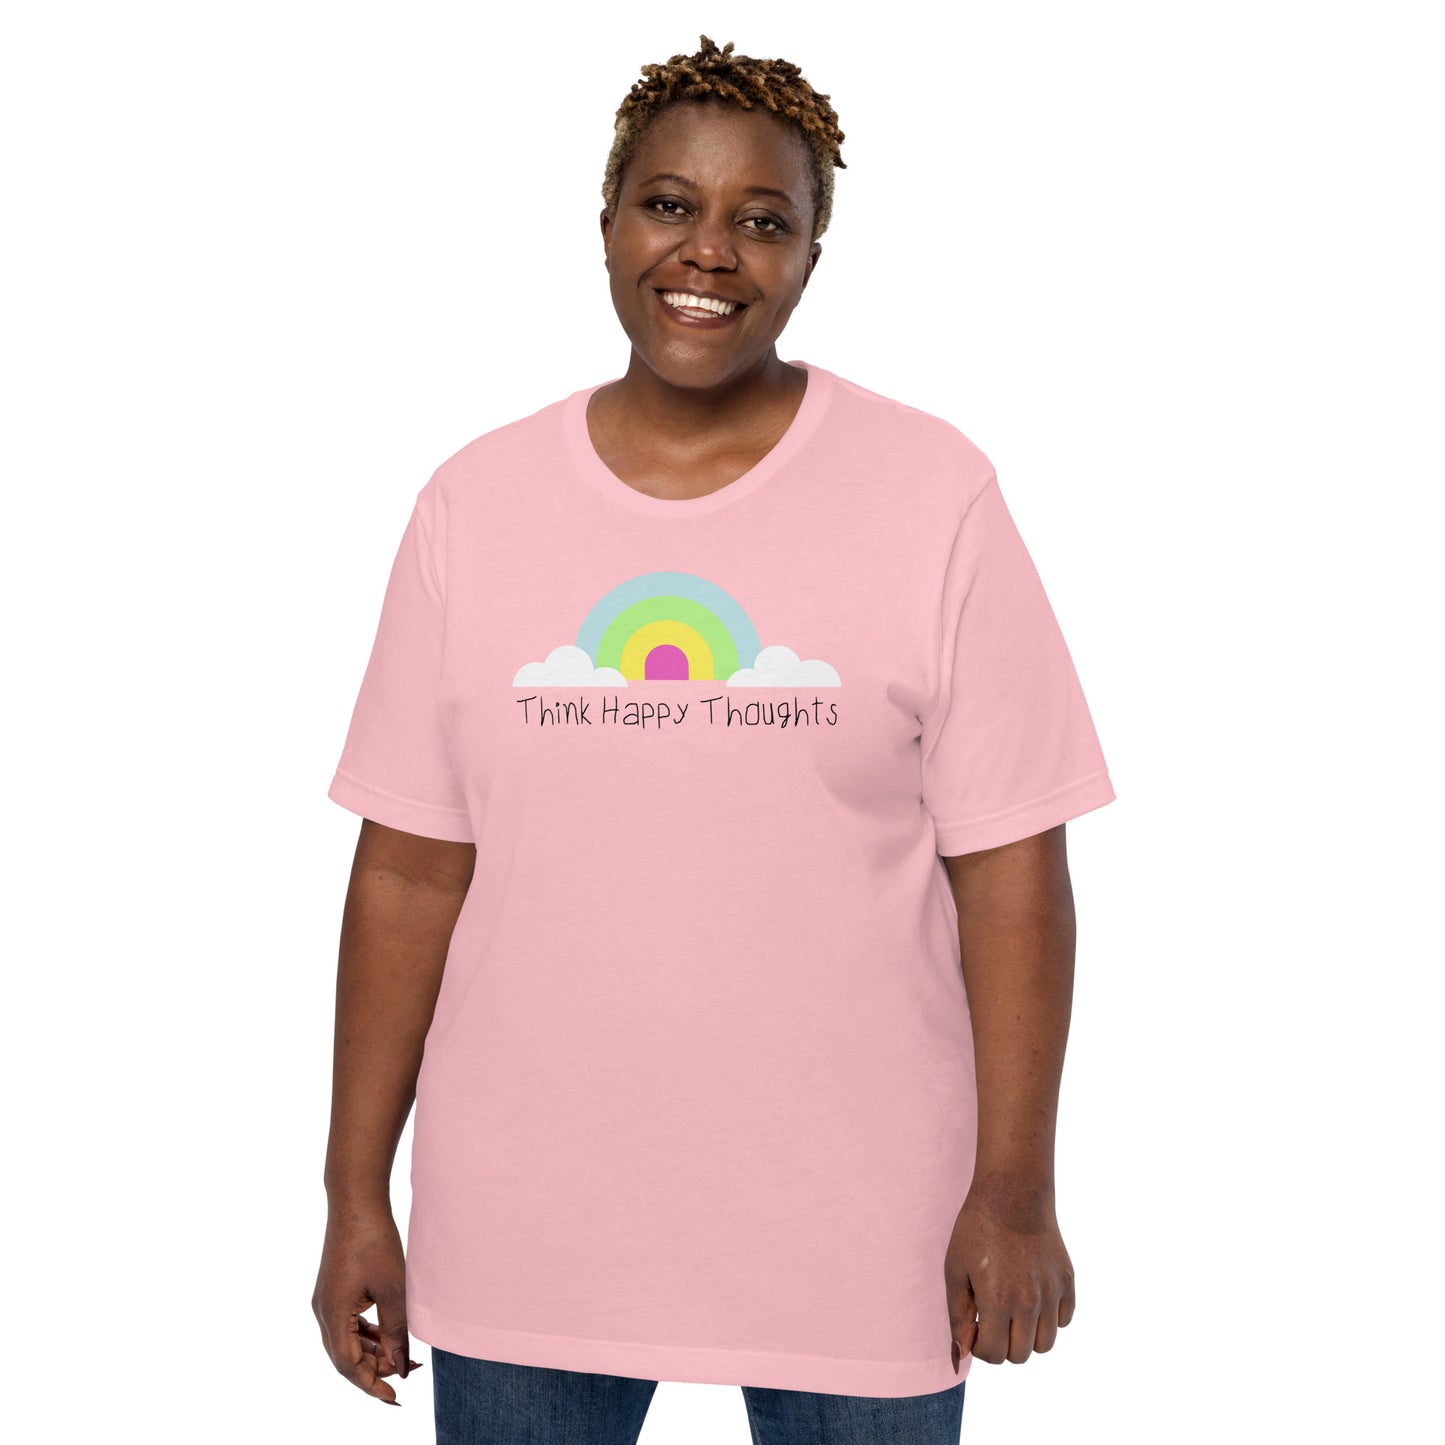 Think Happy Thoughts Short-Sleeve Women's T-Shirt